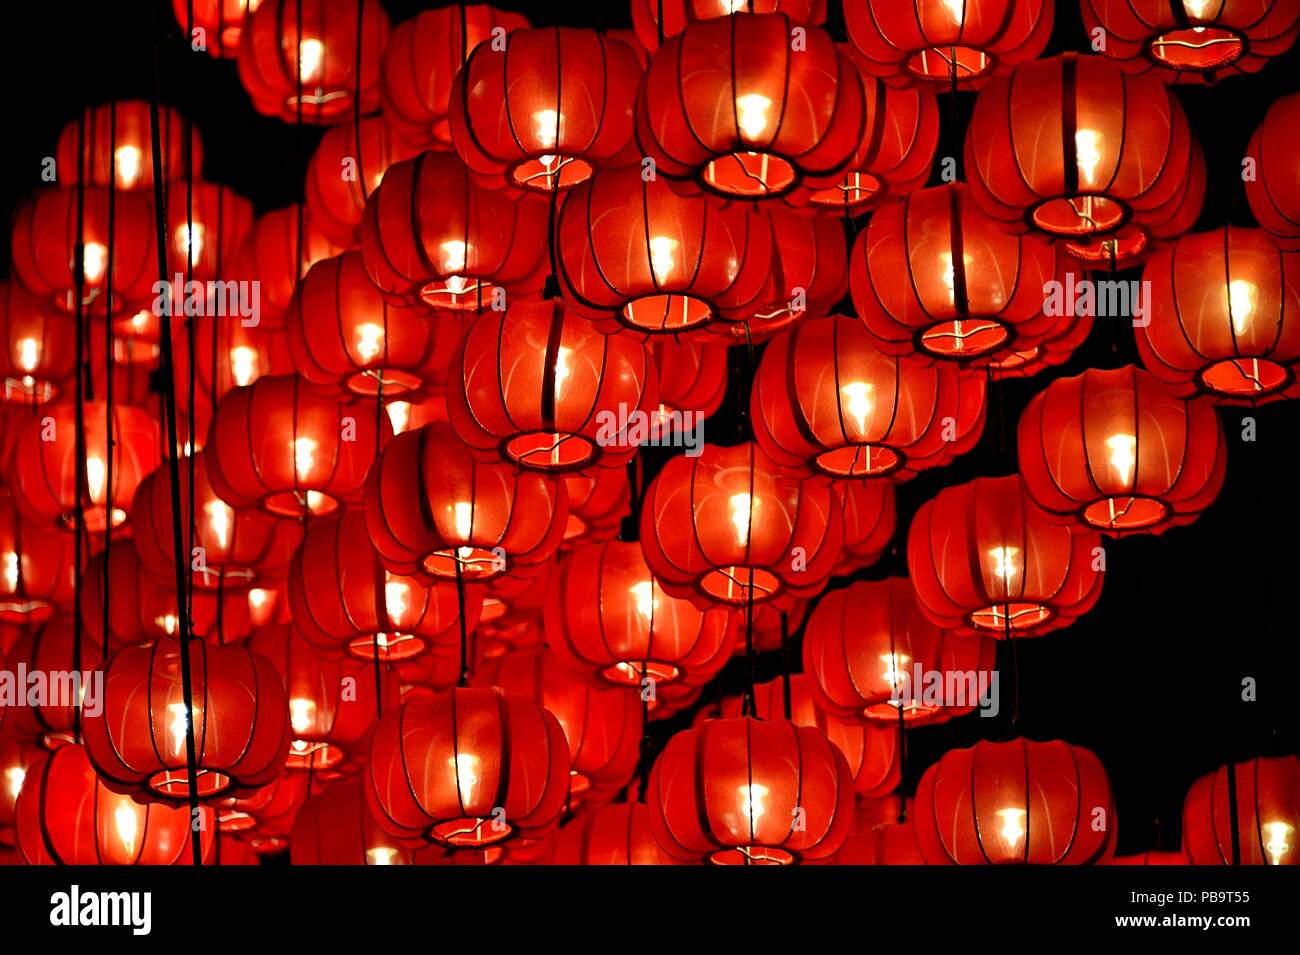 Close up of traditional red hanging Chinese lanterns celebrating festivals like Chinese New Year and mid-Autumn festival as vintage background Stock Photo